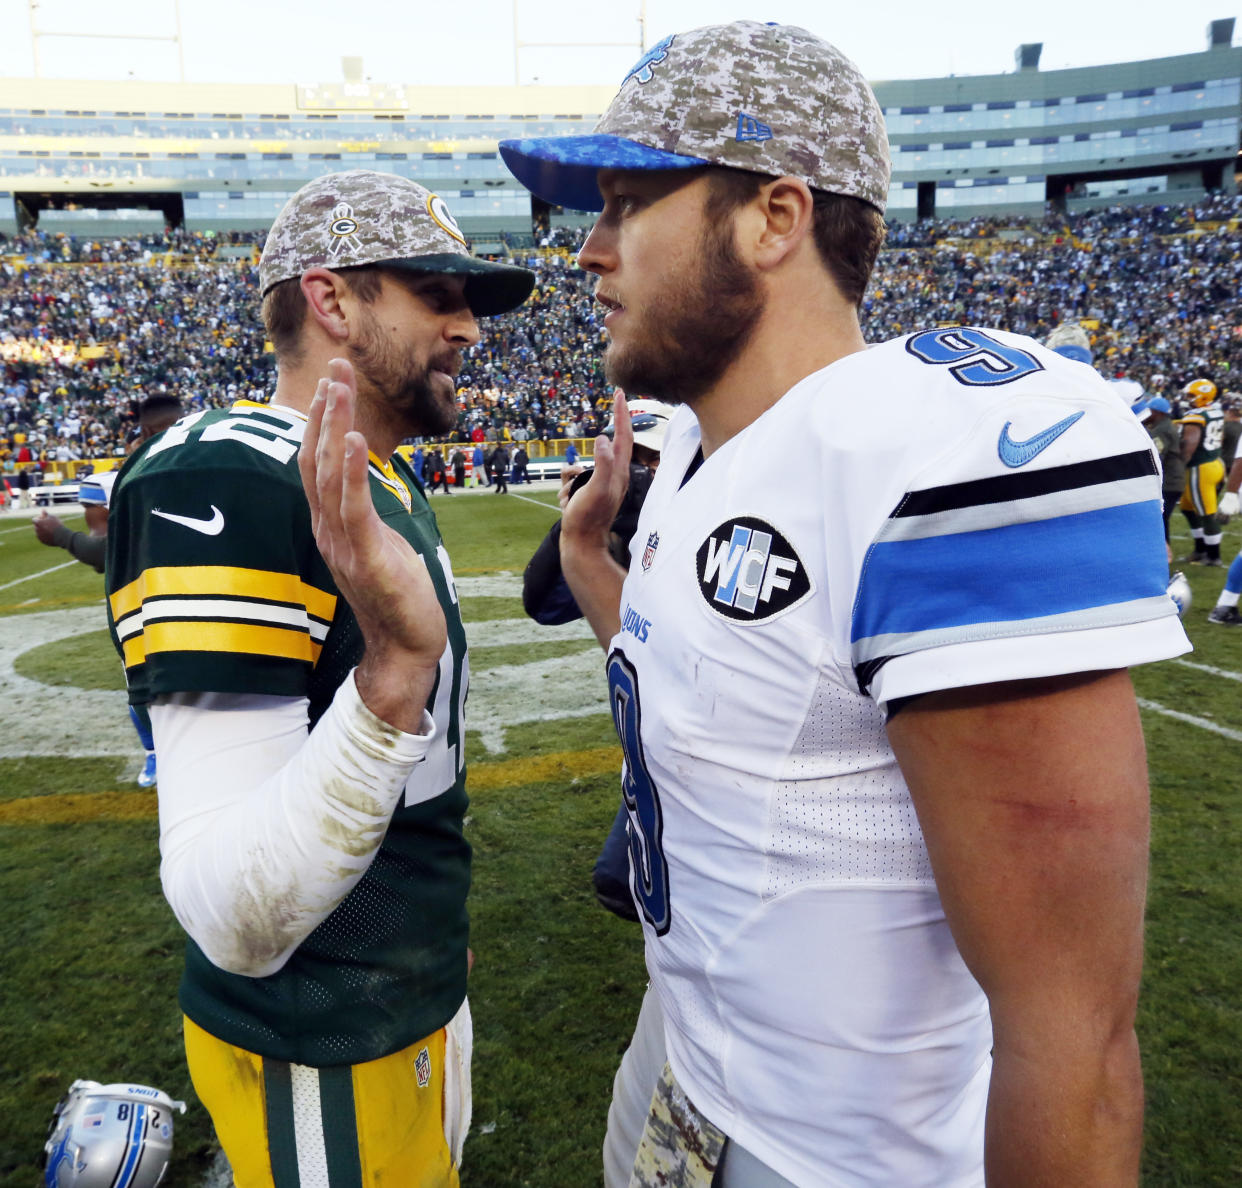 FILE - In this Nov. 15, 2015 file photo, Green Bay Packers' Aaron Rodgers talks to Detroit Lions' Matthew Stafford after an NFL football game in Green Bay, Wis.  Rodgers has been struggling a bit this season while Stafford is in one of his best grooves. The quarterback  who plays best Thursday, Dec. 3 will likely help his team win at Ford Field. (AP Photo/Mike Roemer)